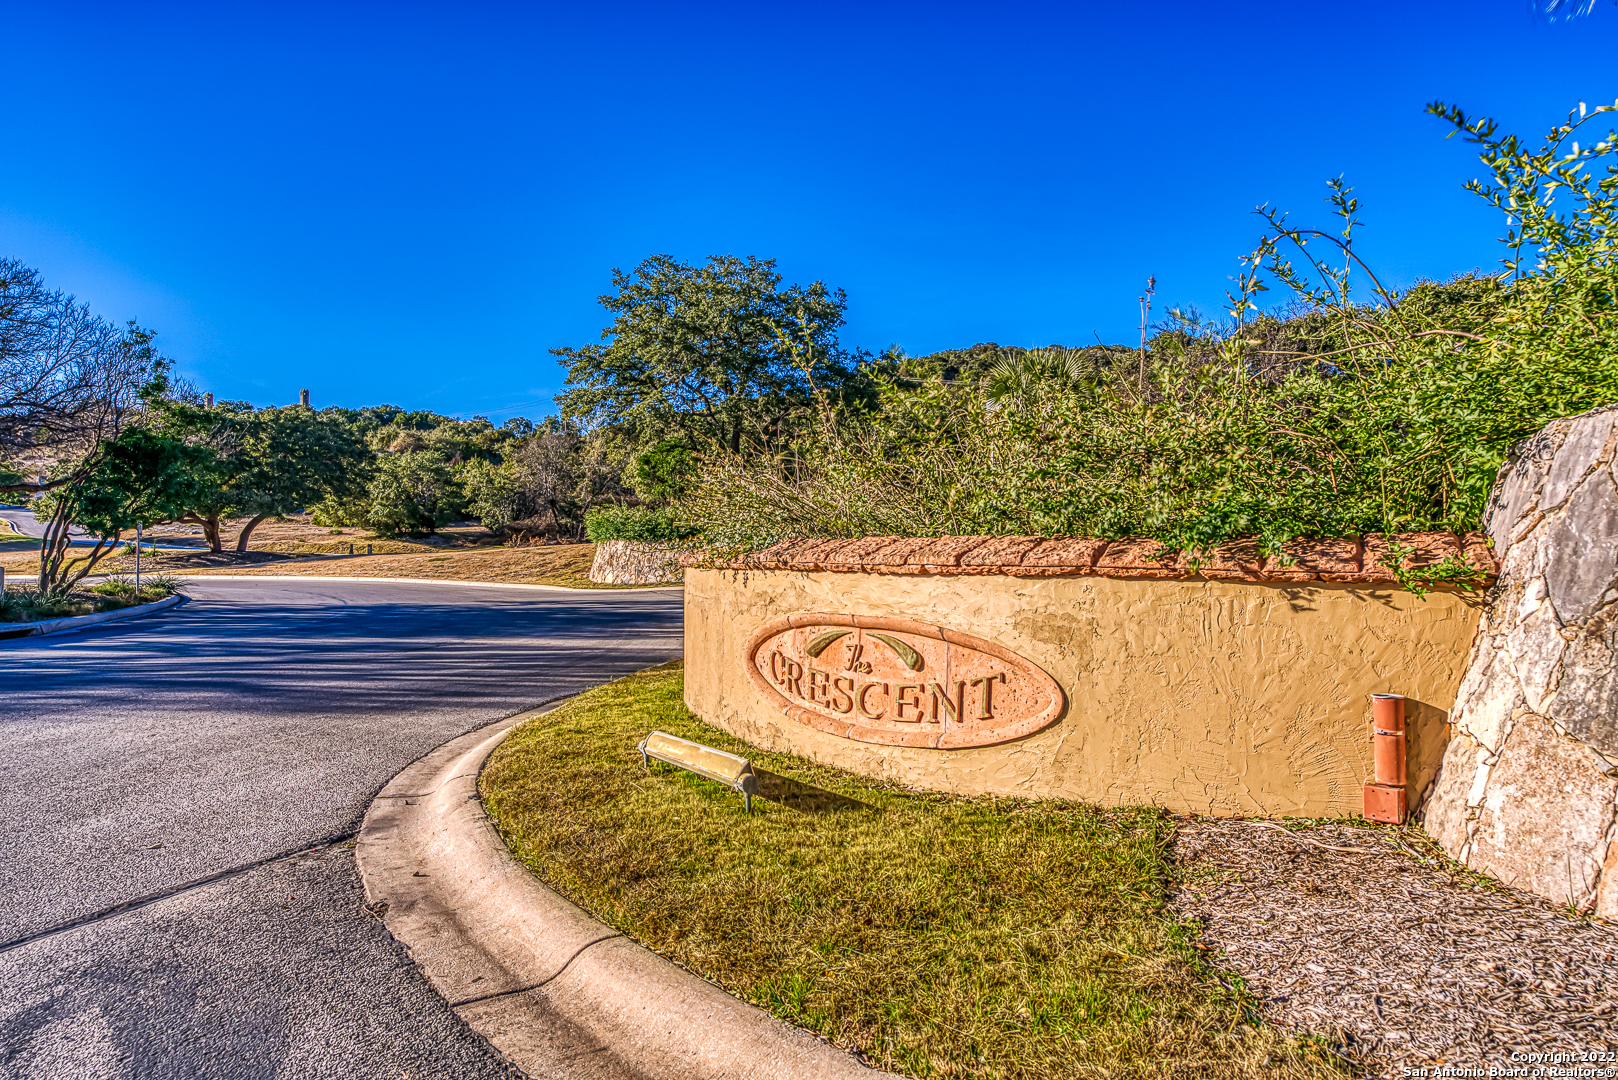 One of the most desirable and prestigious addresses in The Dominion. The Crescent is home to San Antonio's most stunning and iconic homes and this only available lot offers unparalleled views to the Hill Country. Located at the near epicenter of The Dominion this homesite can lend itself to a sprawling single level or go vertical for even more impressive views.  You can bring your own builder and there is no time constraint to build. The current owner has already invested in a fully enclosed (minus one small area) hand made wrought iron railed fence coupled with Cantera stone pillars with dedicated electrical drops at each pillar. Perfect for holiday lighting. Also you will see a stunning fountain and living area that was created. The design can compliment this look or perhaps your builder can make some easy changes to the look so it could compliment your design.  The Dominion neighborhood has controlled 24/7 guarded access with lots of amenities including Pool, golf course, club house and much more. (Sports and club require separate membership)